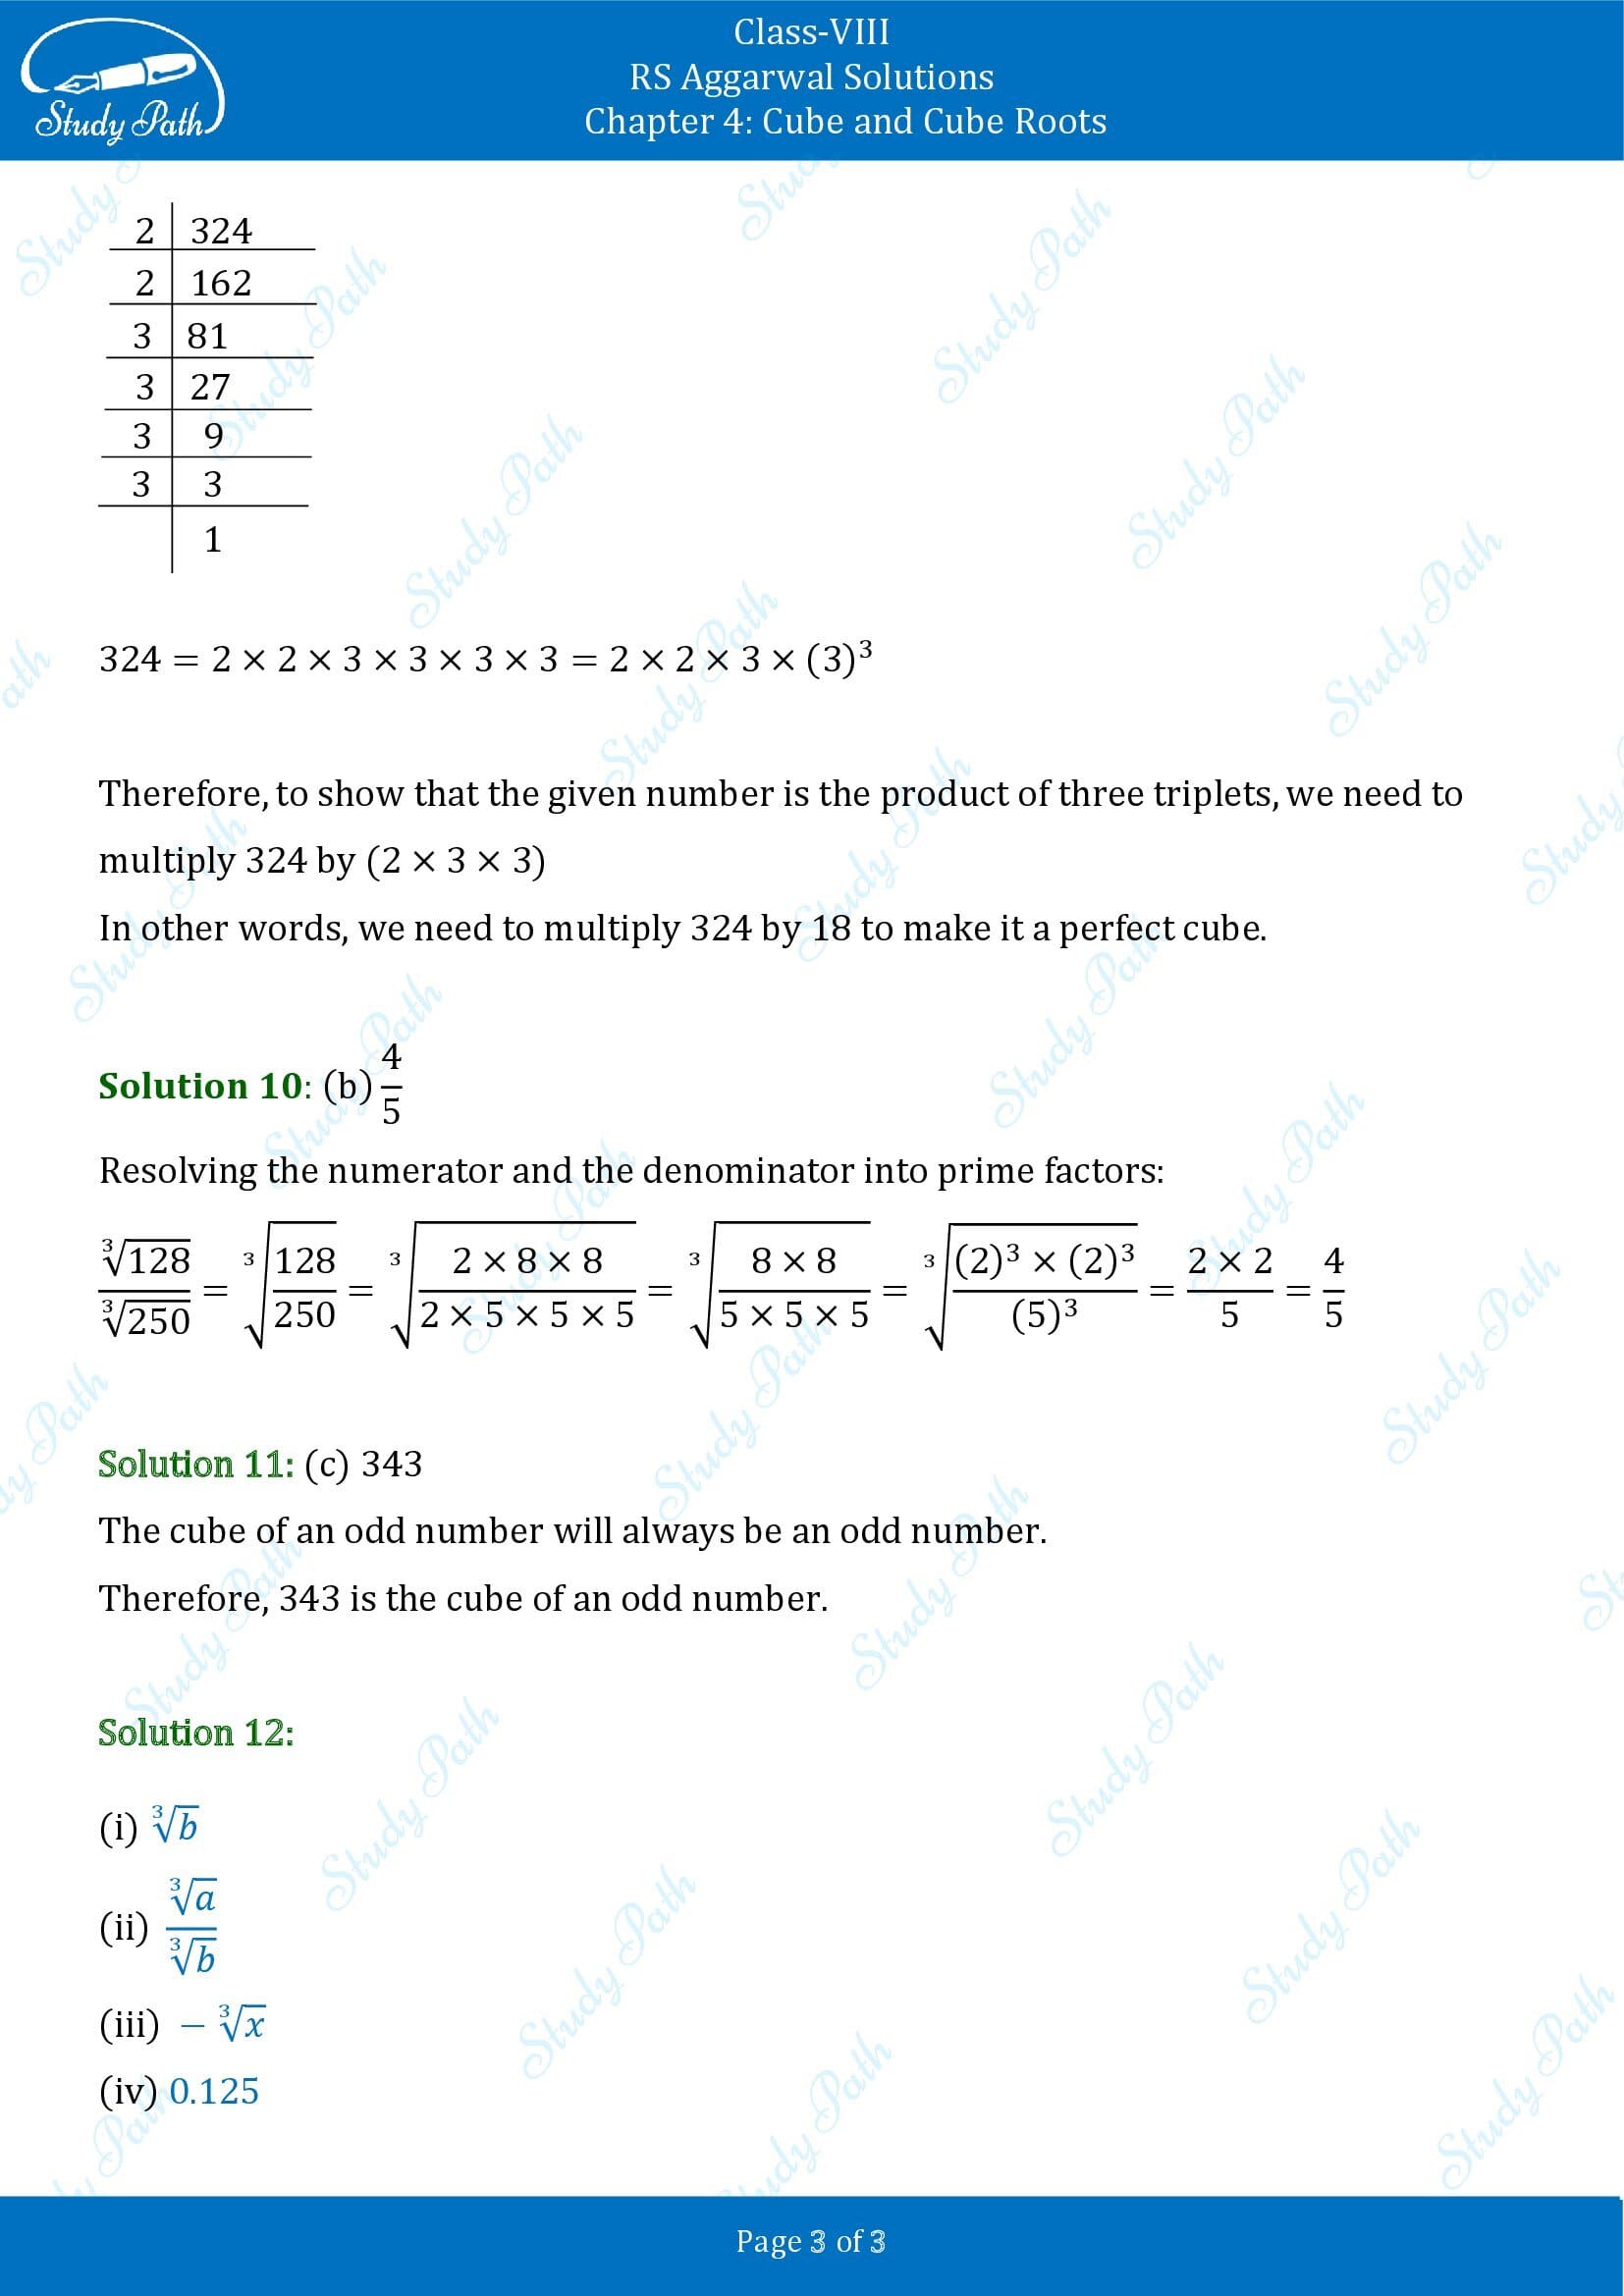 RS Aggarwal Solutions Class 8 Chapter 4 Cube and Cube Roots Test Paper 0003